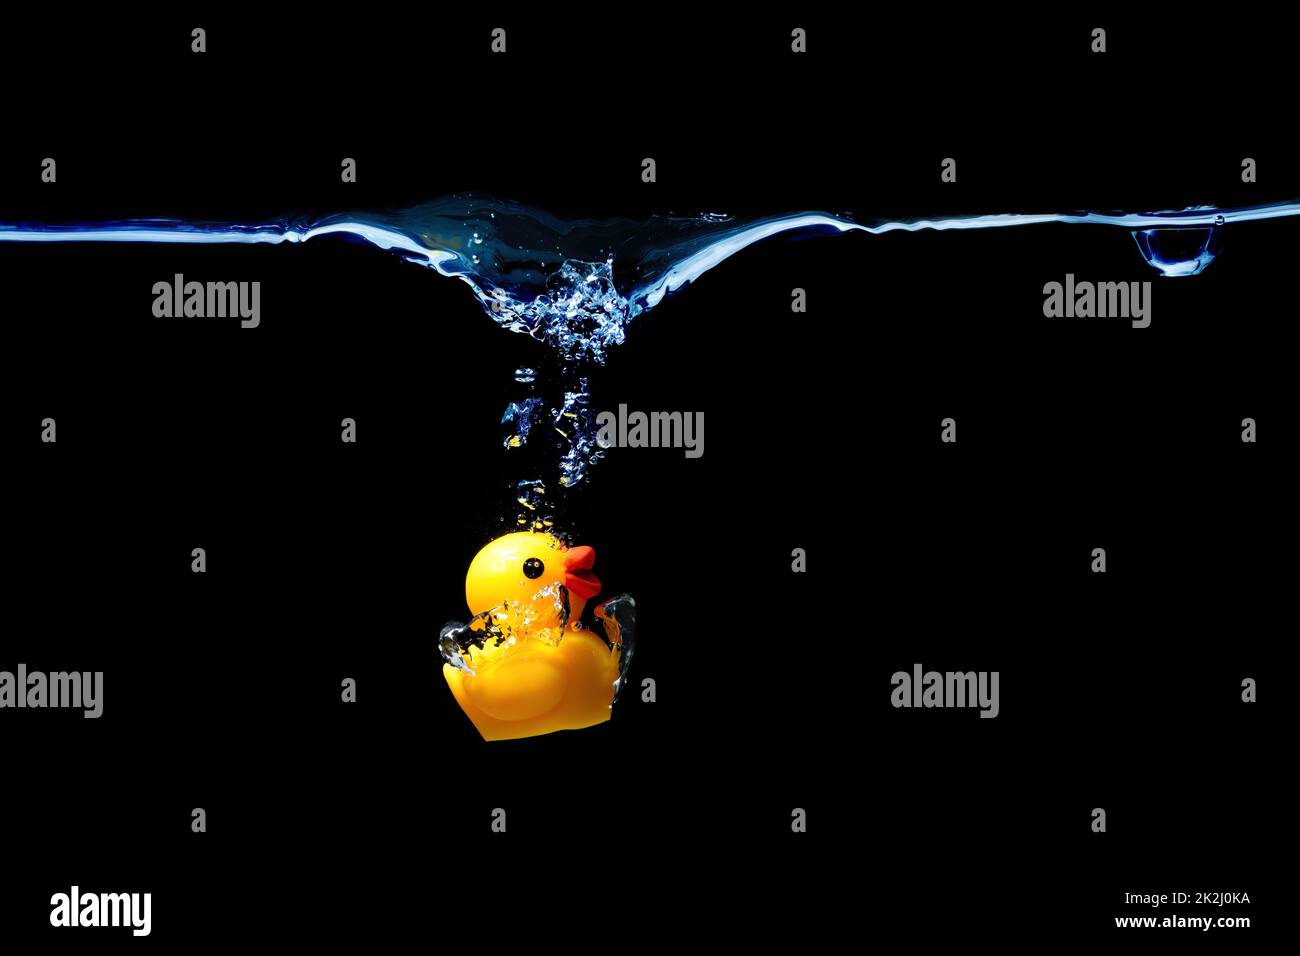 Toy duck splashing in water isolated on black background. Stock Photo